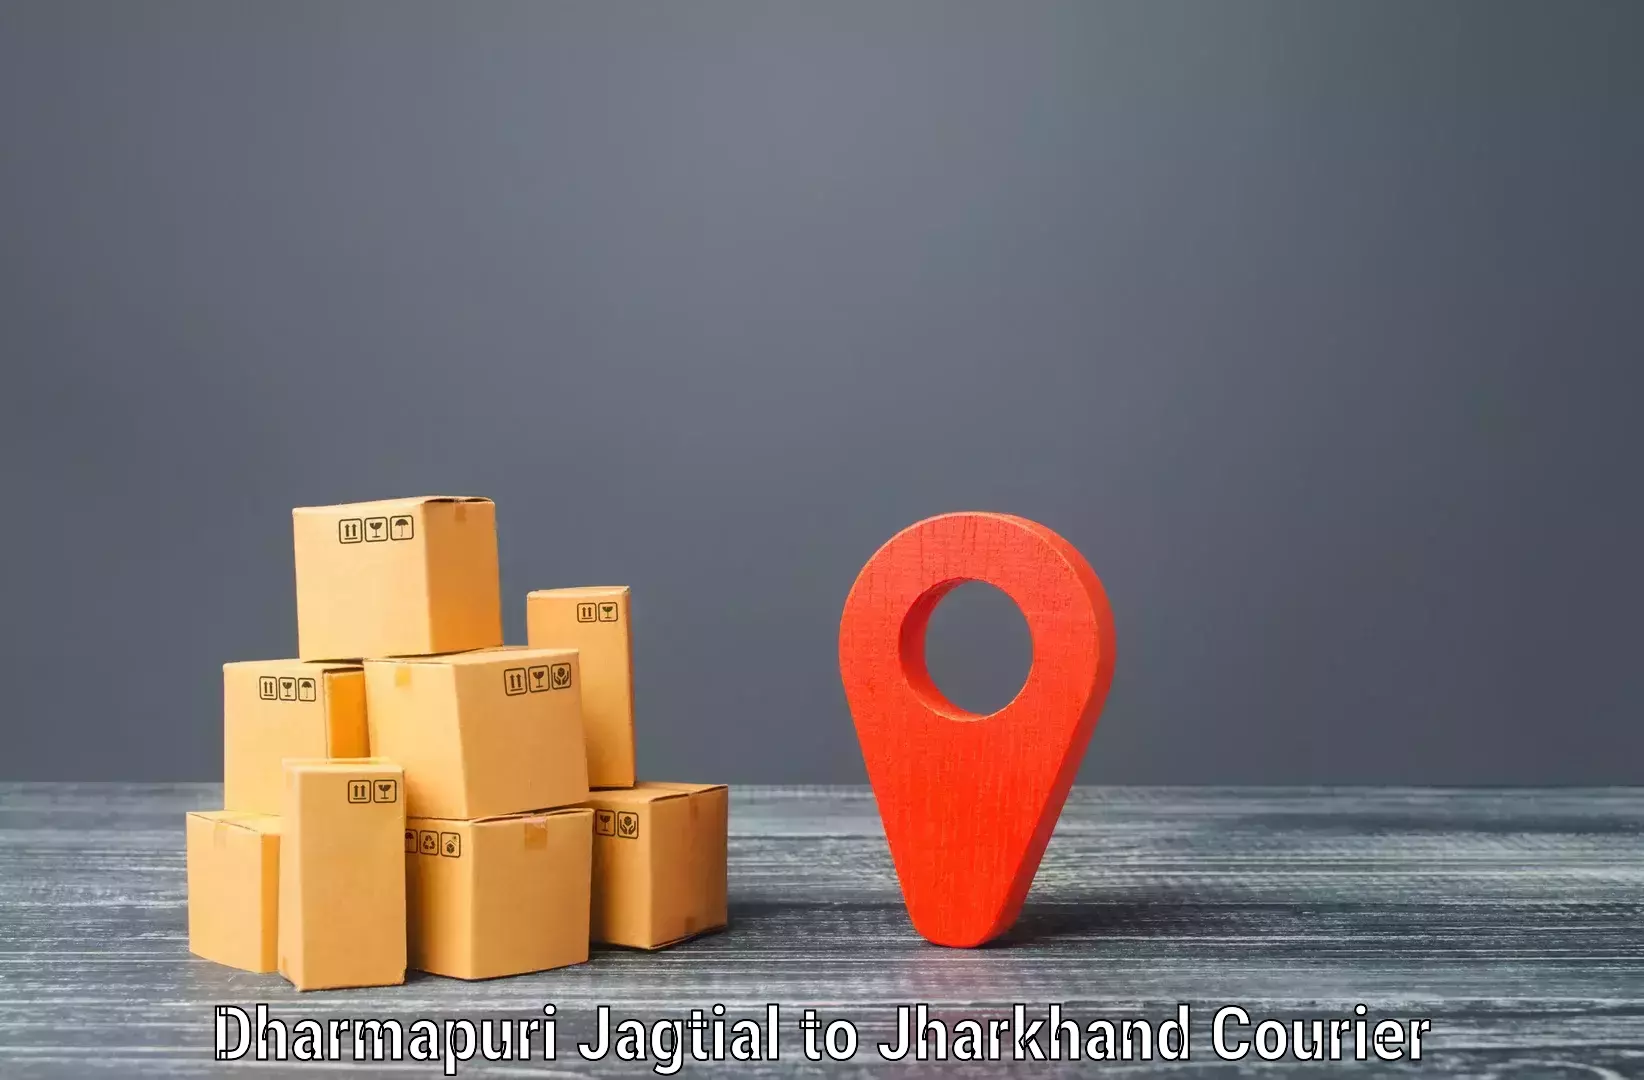 Multi-national courier services Dharmapuri Jagtial to Tisri